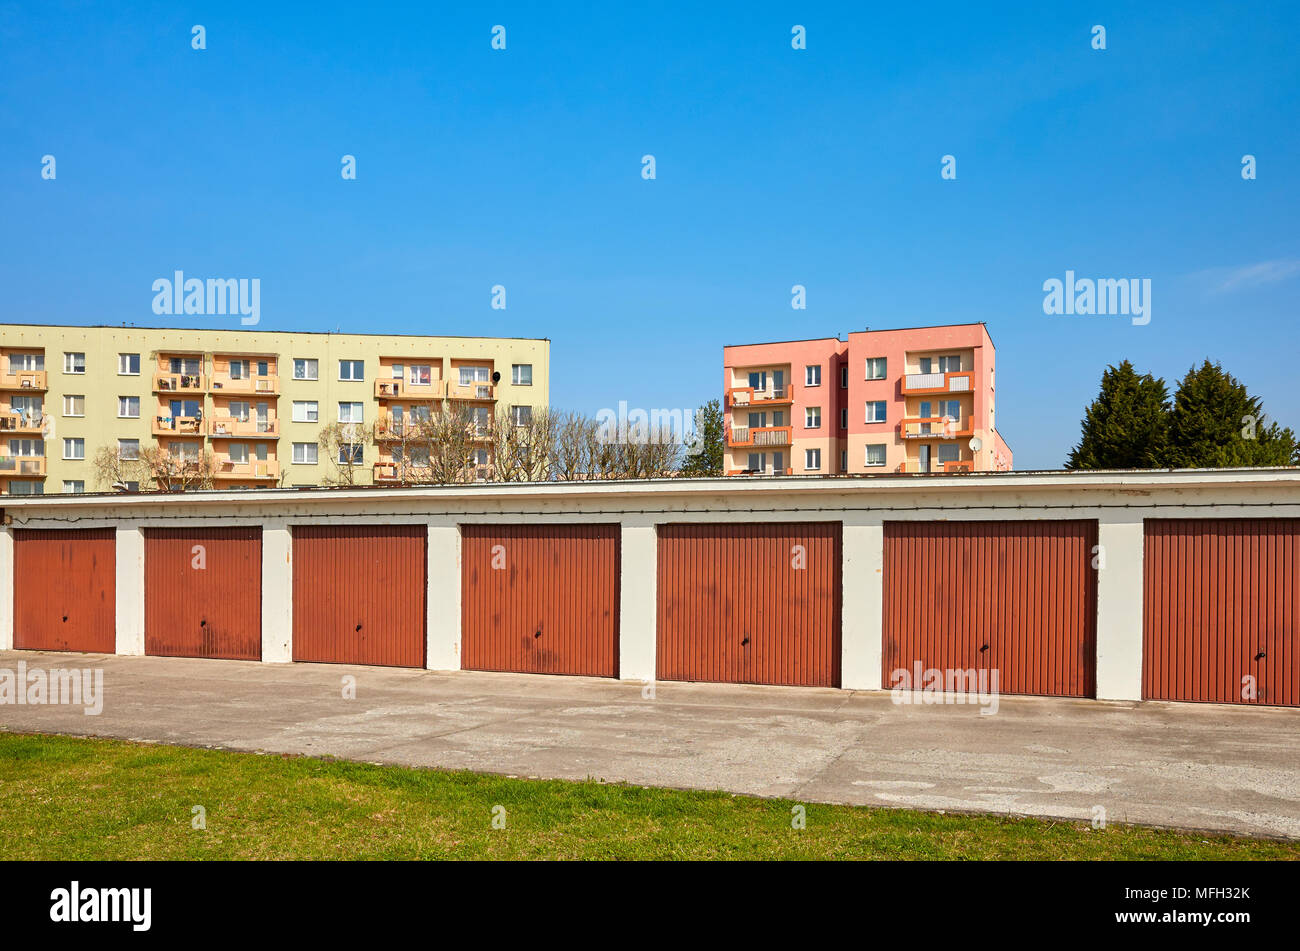 Row of garages with closed gates in a residential neighborhood, Szczecin, Poland. Stock Photo